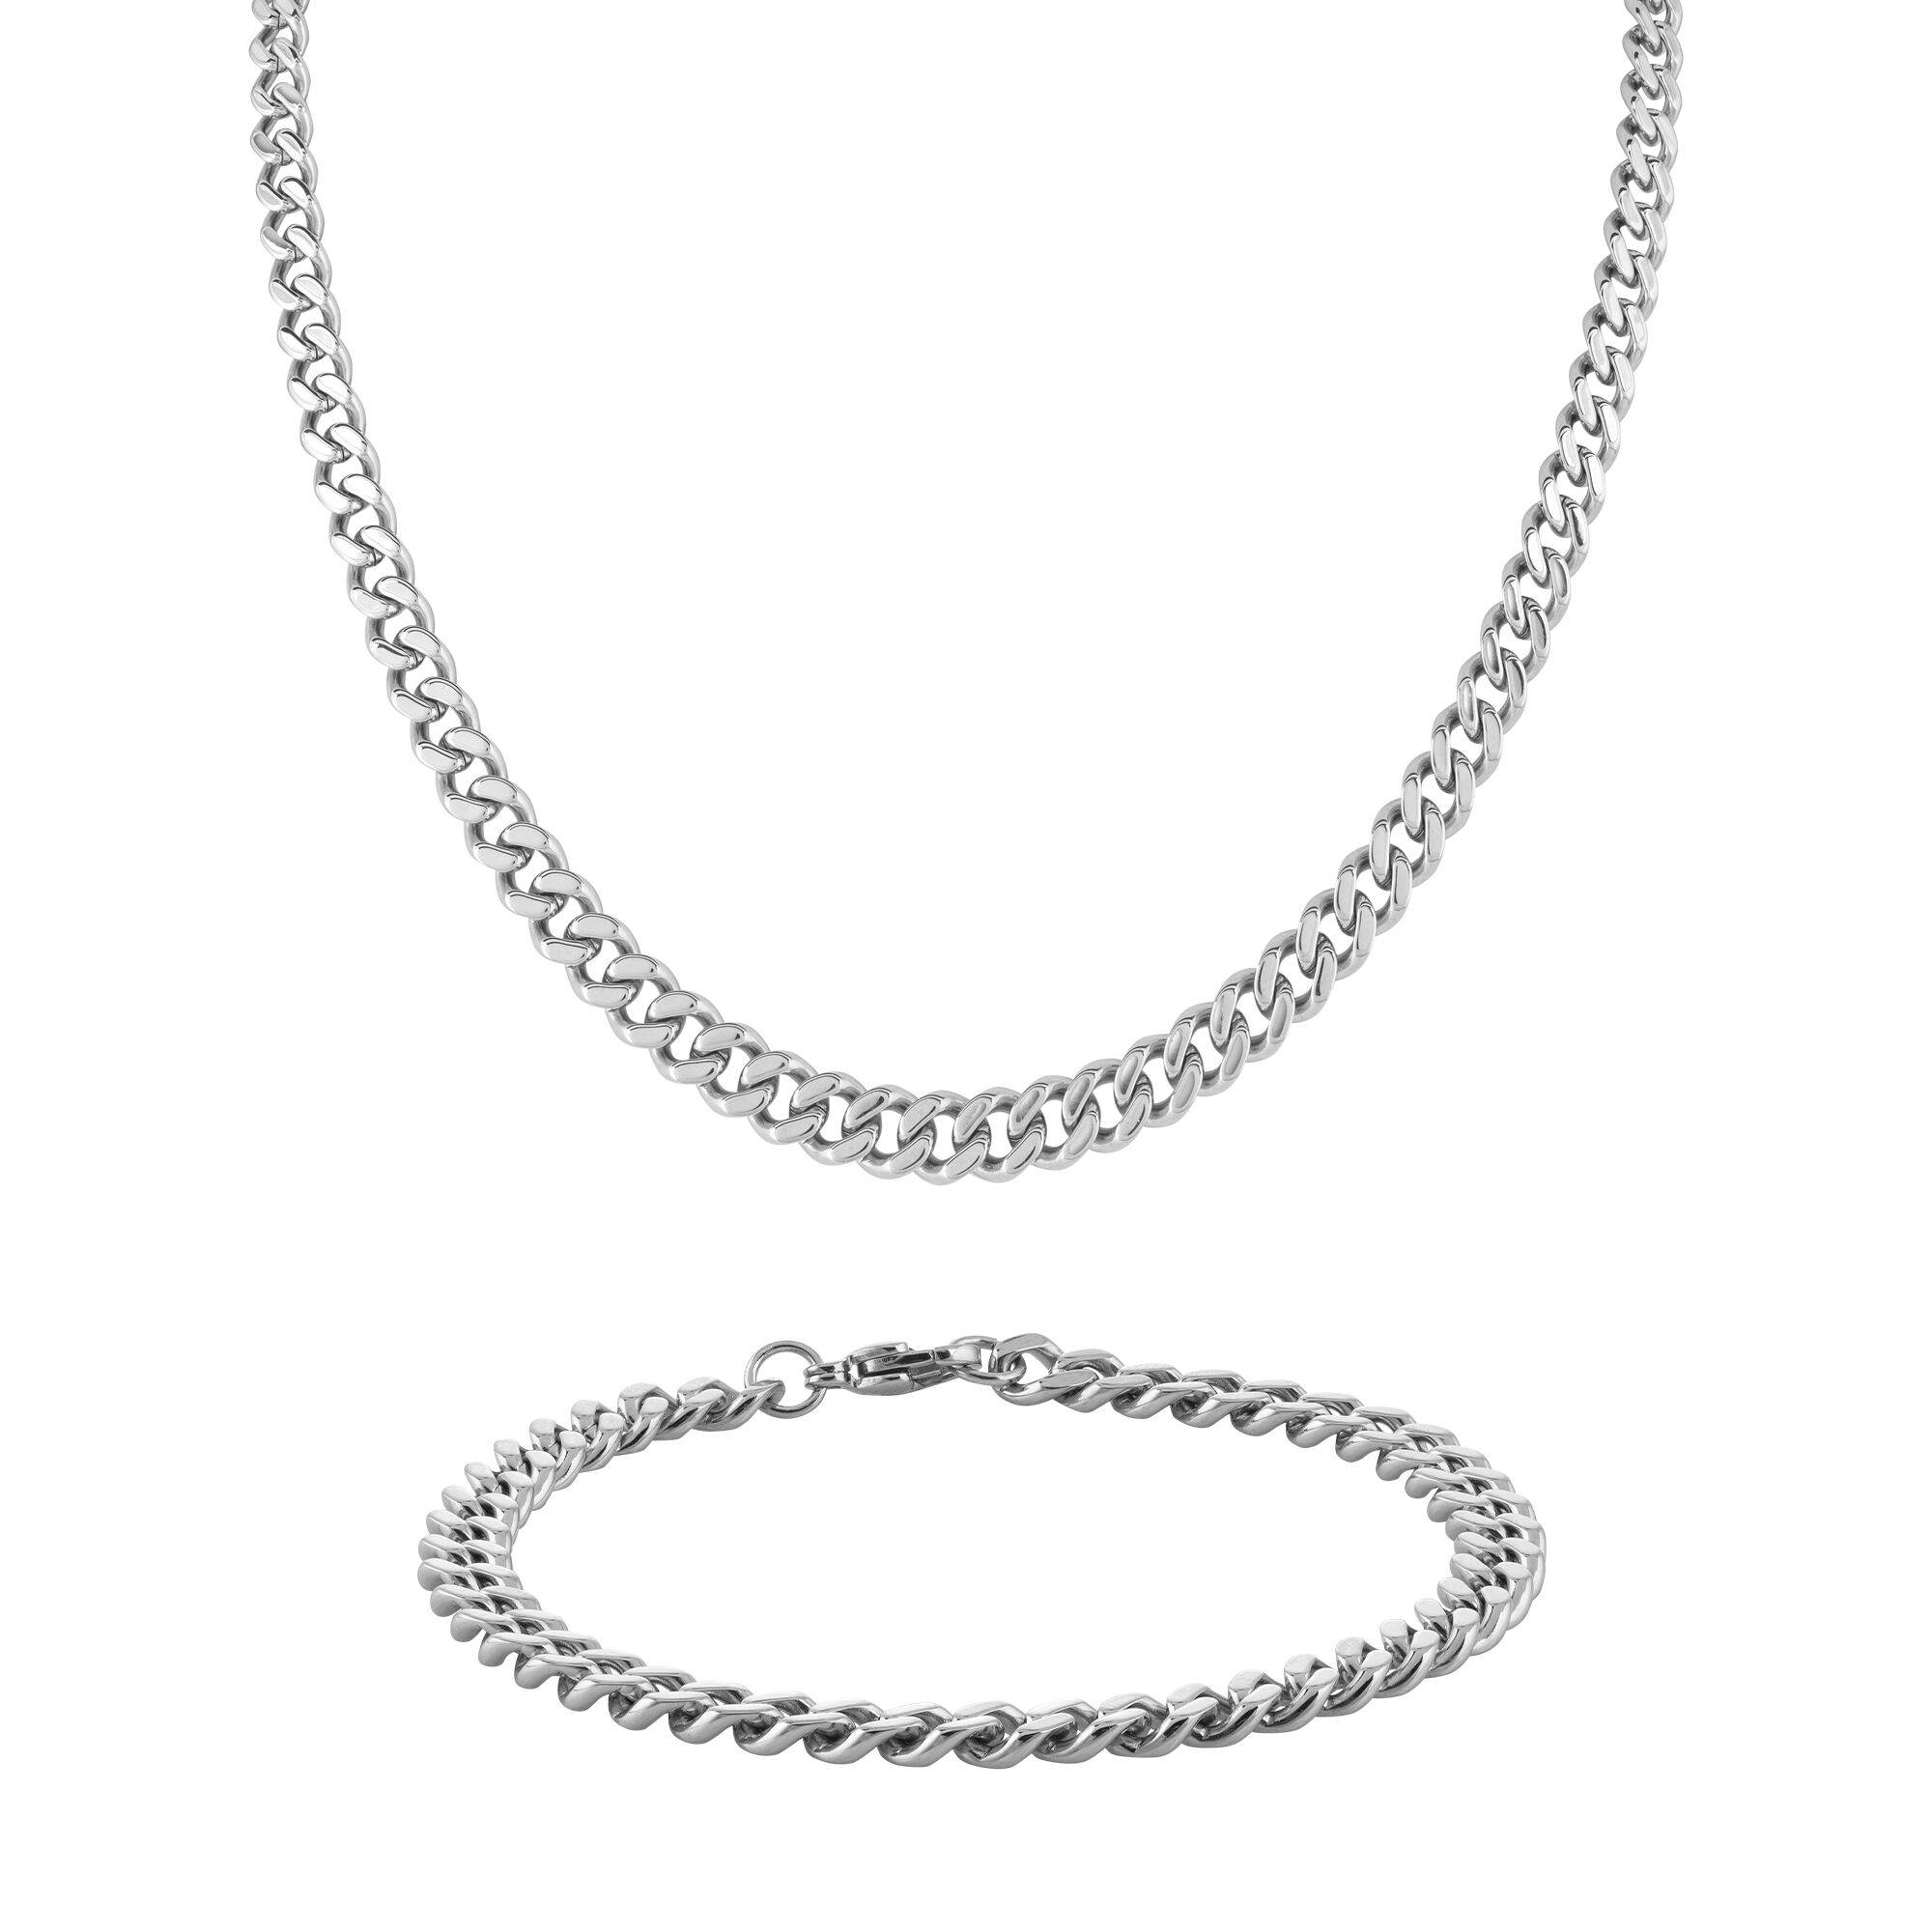 Men's Stainless Steel Curb Chain Necklace | Lisa Angel